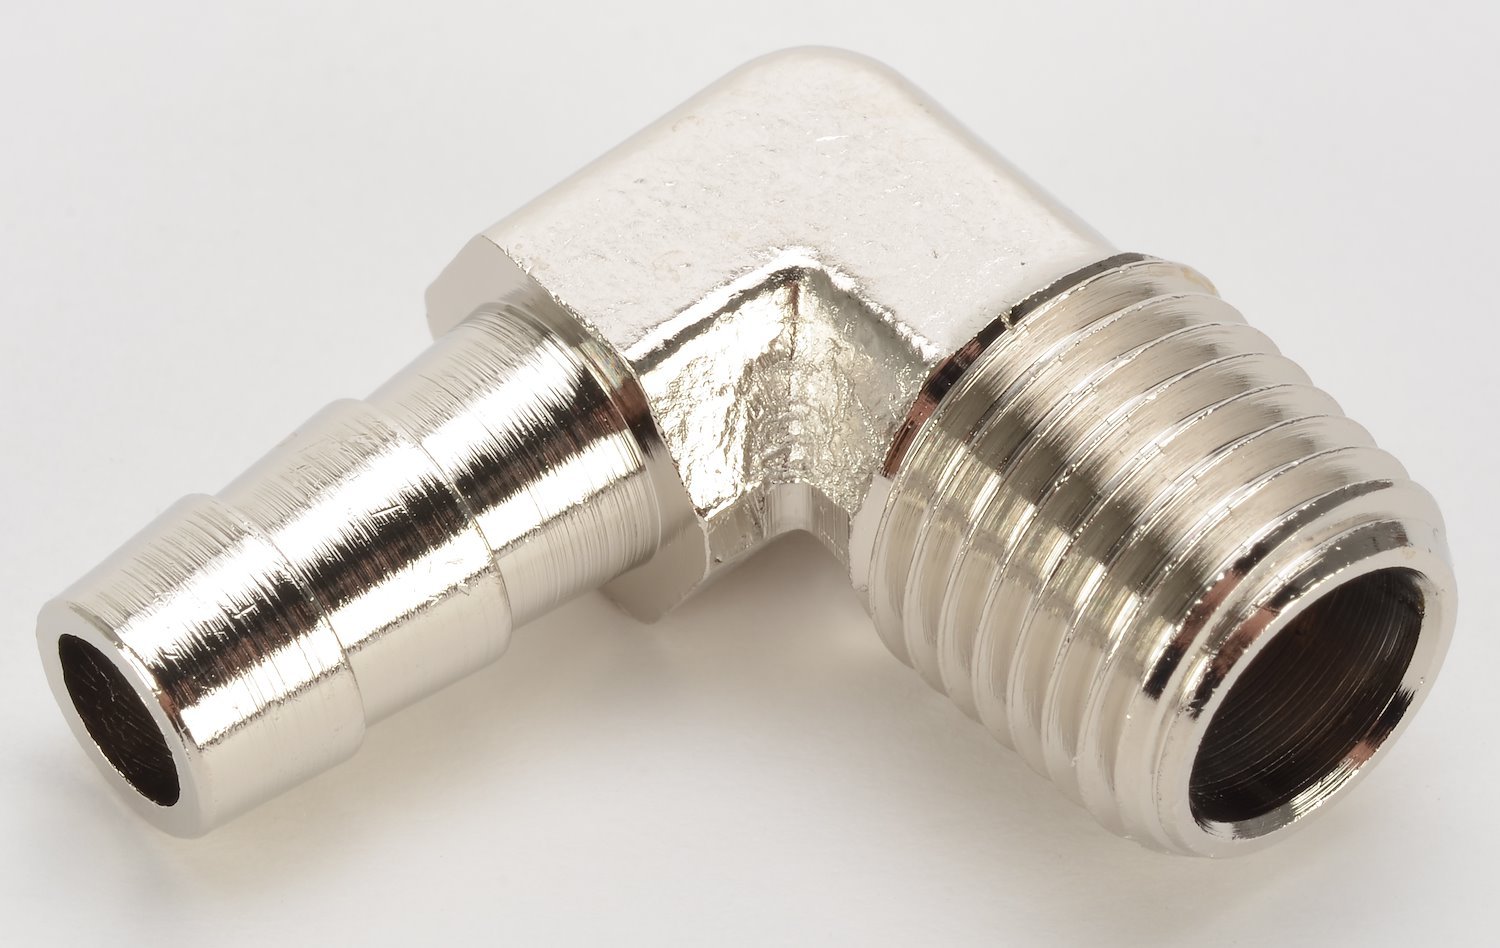 NPT 90-Degree Hose Barb Fitting [1/4 in. NPT to 5/16 in. Hose, Nickel-Plated Brass]